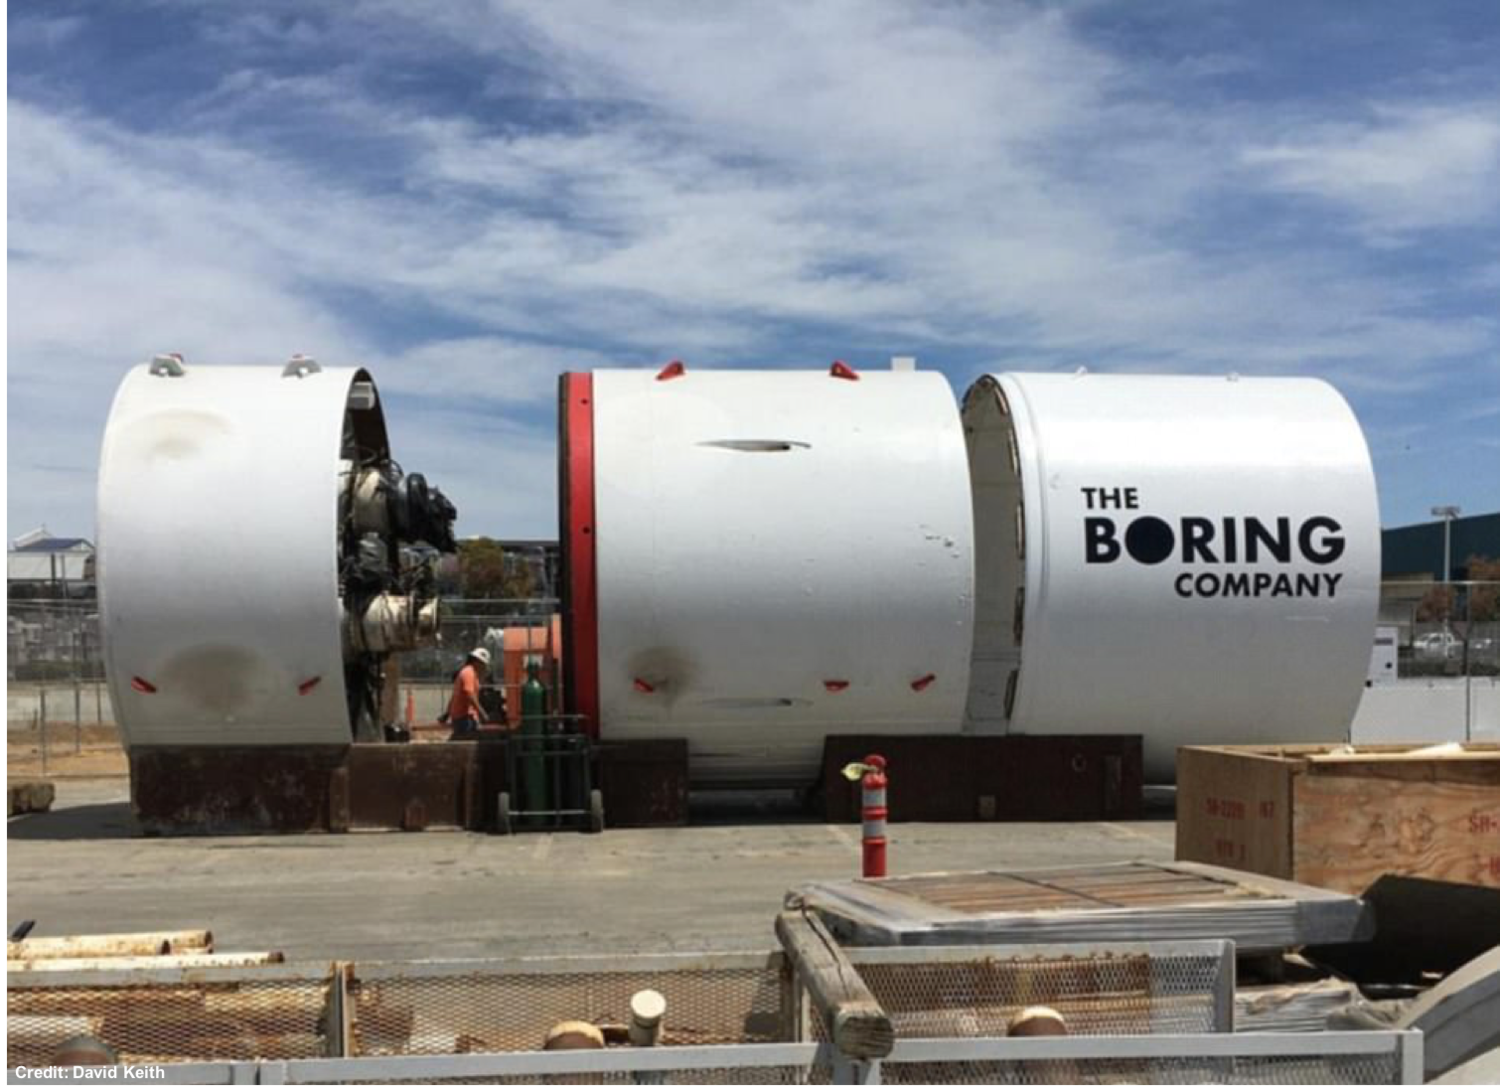 The Boring Company Wins Approval for 2 Additional Las Vegas Tunnels